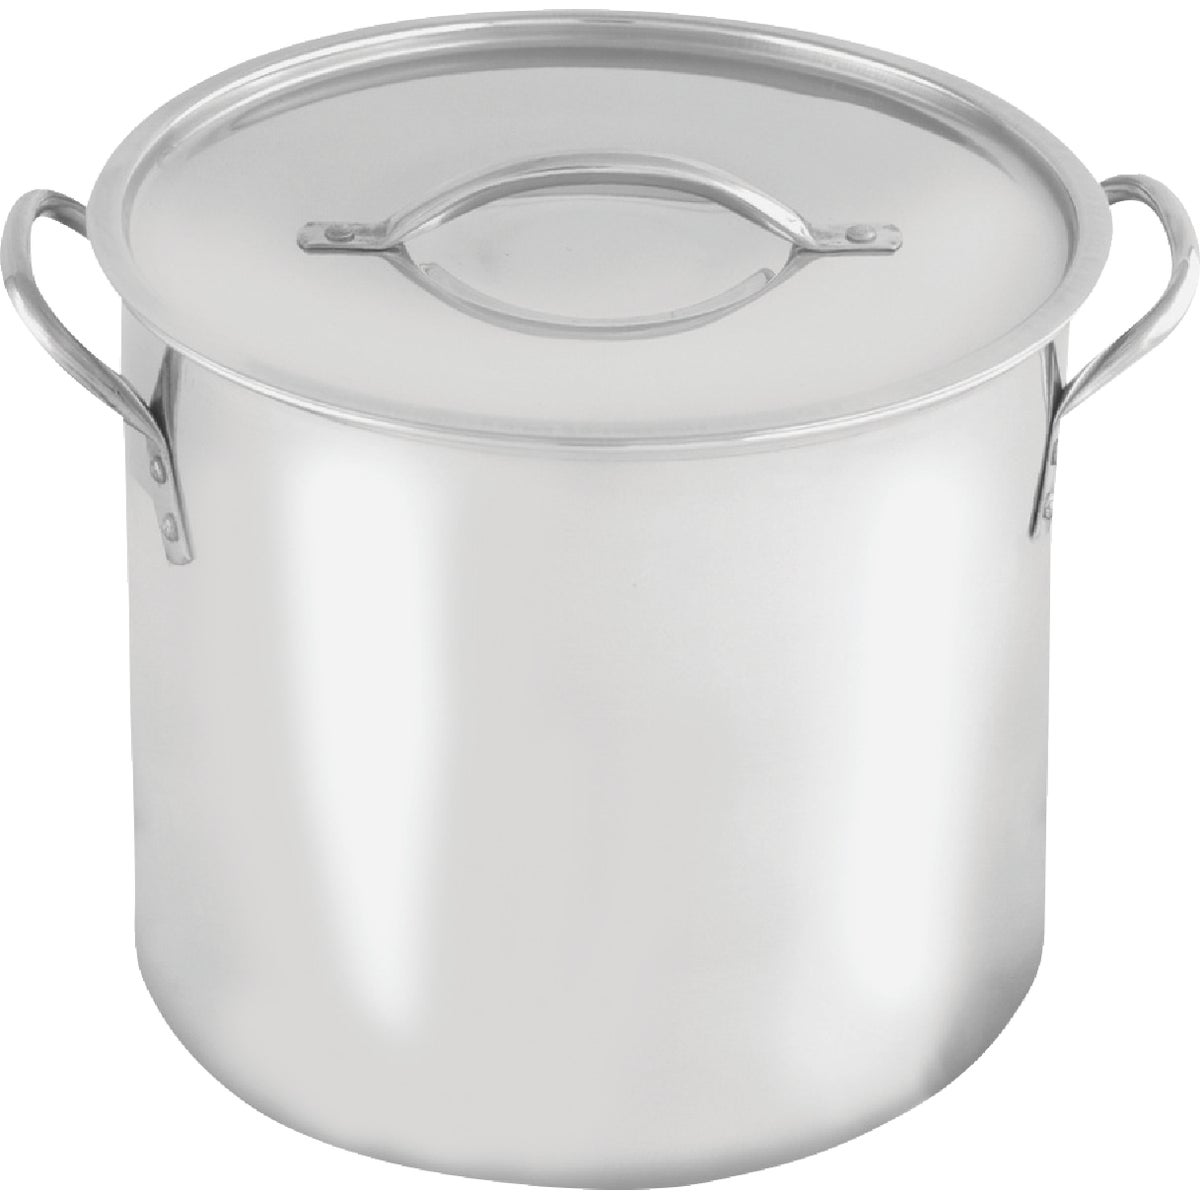 McSunley 12 Qt. Polished Stainless Steel Stockpot